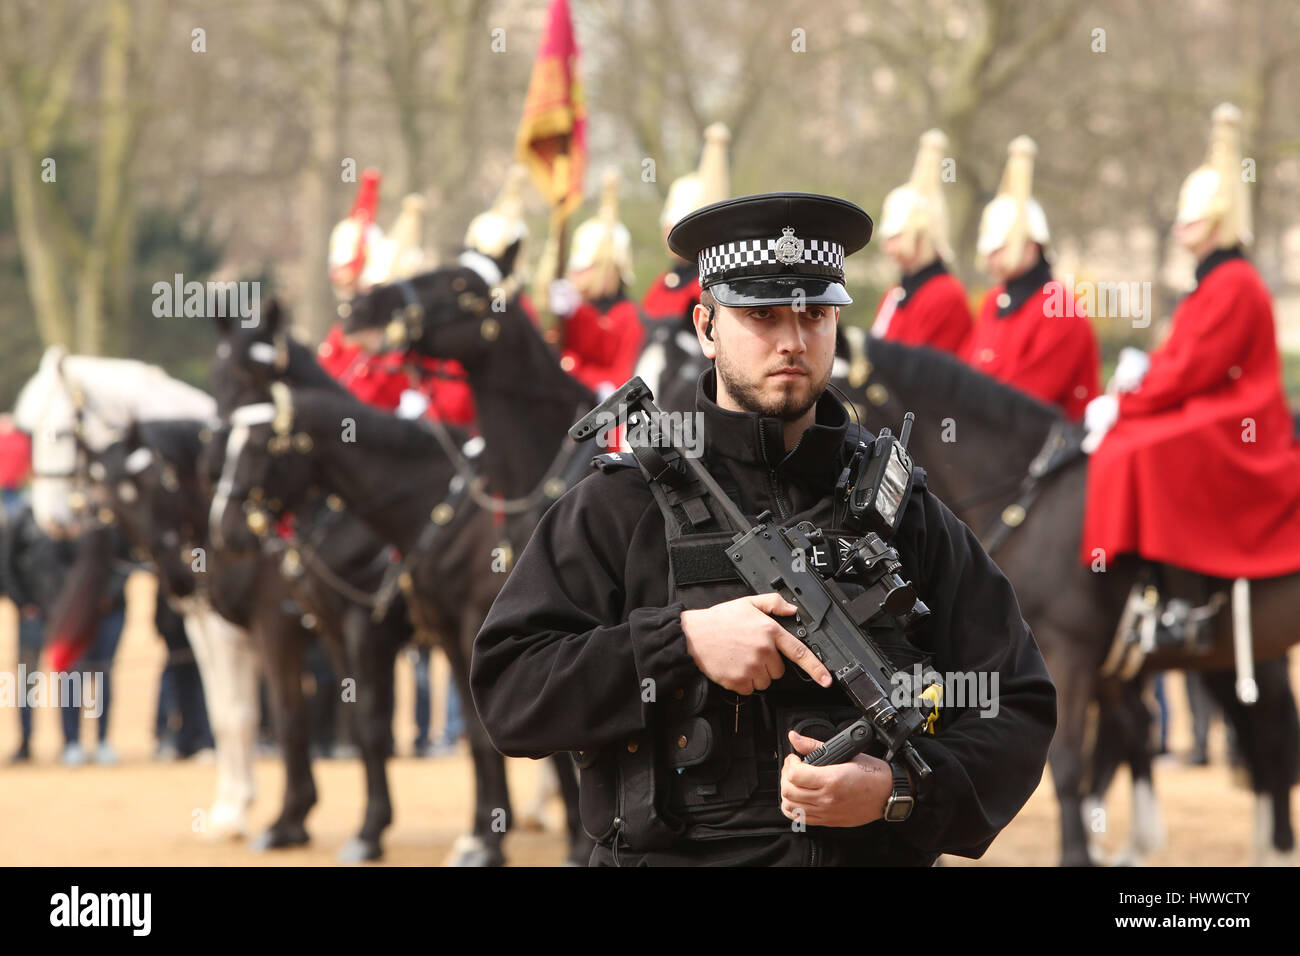 London, UK. 23rd March 2017.   Armed Police watch over mounted soldiers and tourists on Horse Guards Parade. Credit: Nigel Bowles/Alamy Live News Stock Photo